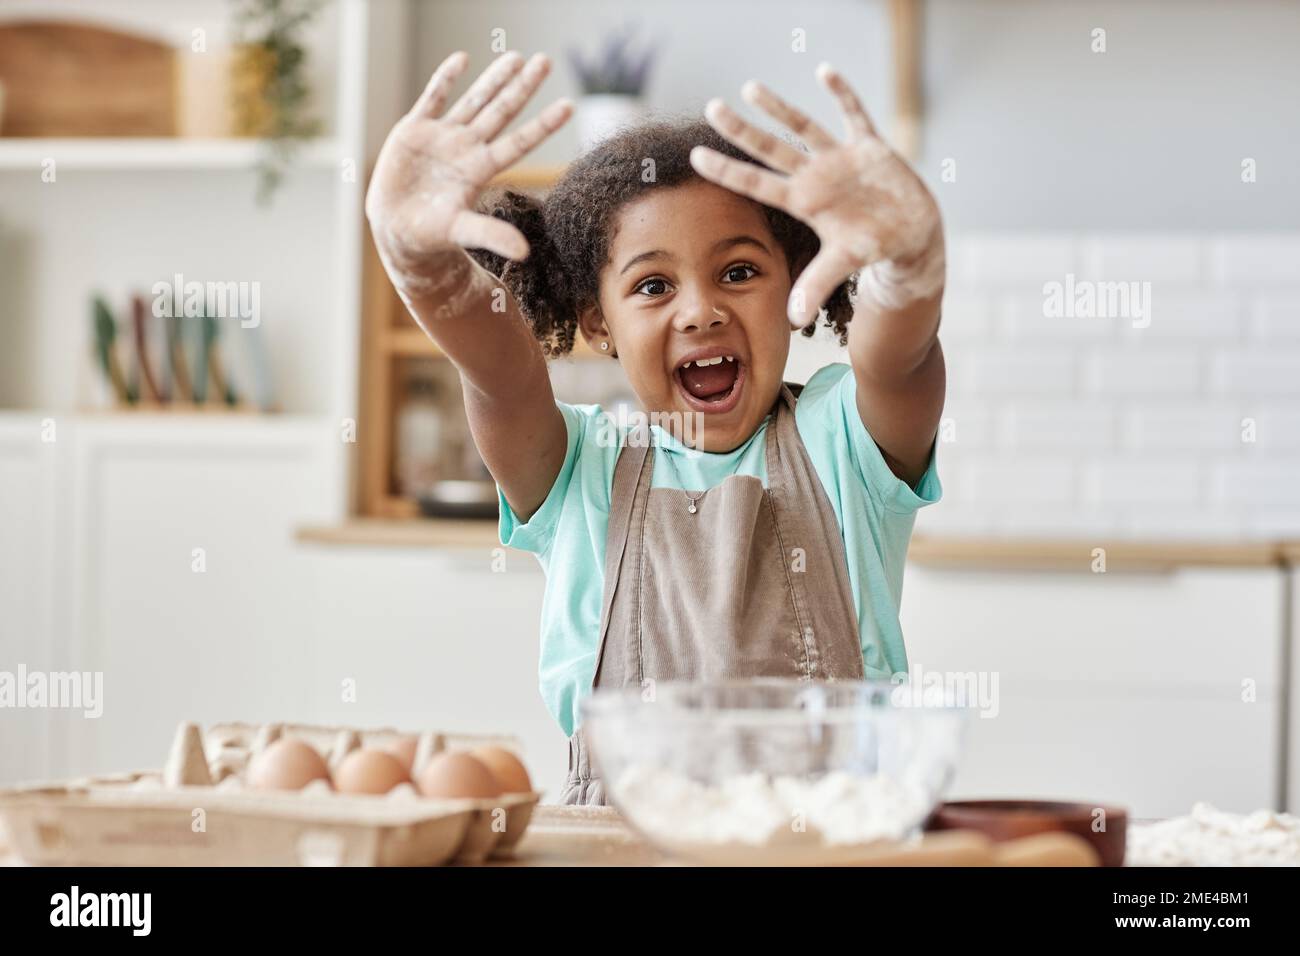 Portrait of happy black girl enjoying baking in kitchen and showing hands with flour to camera, copy space Stock Photo